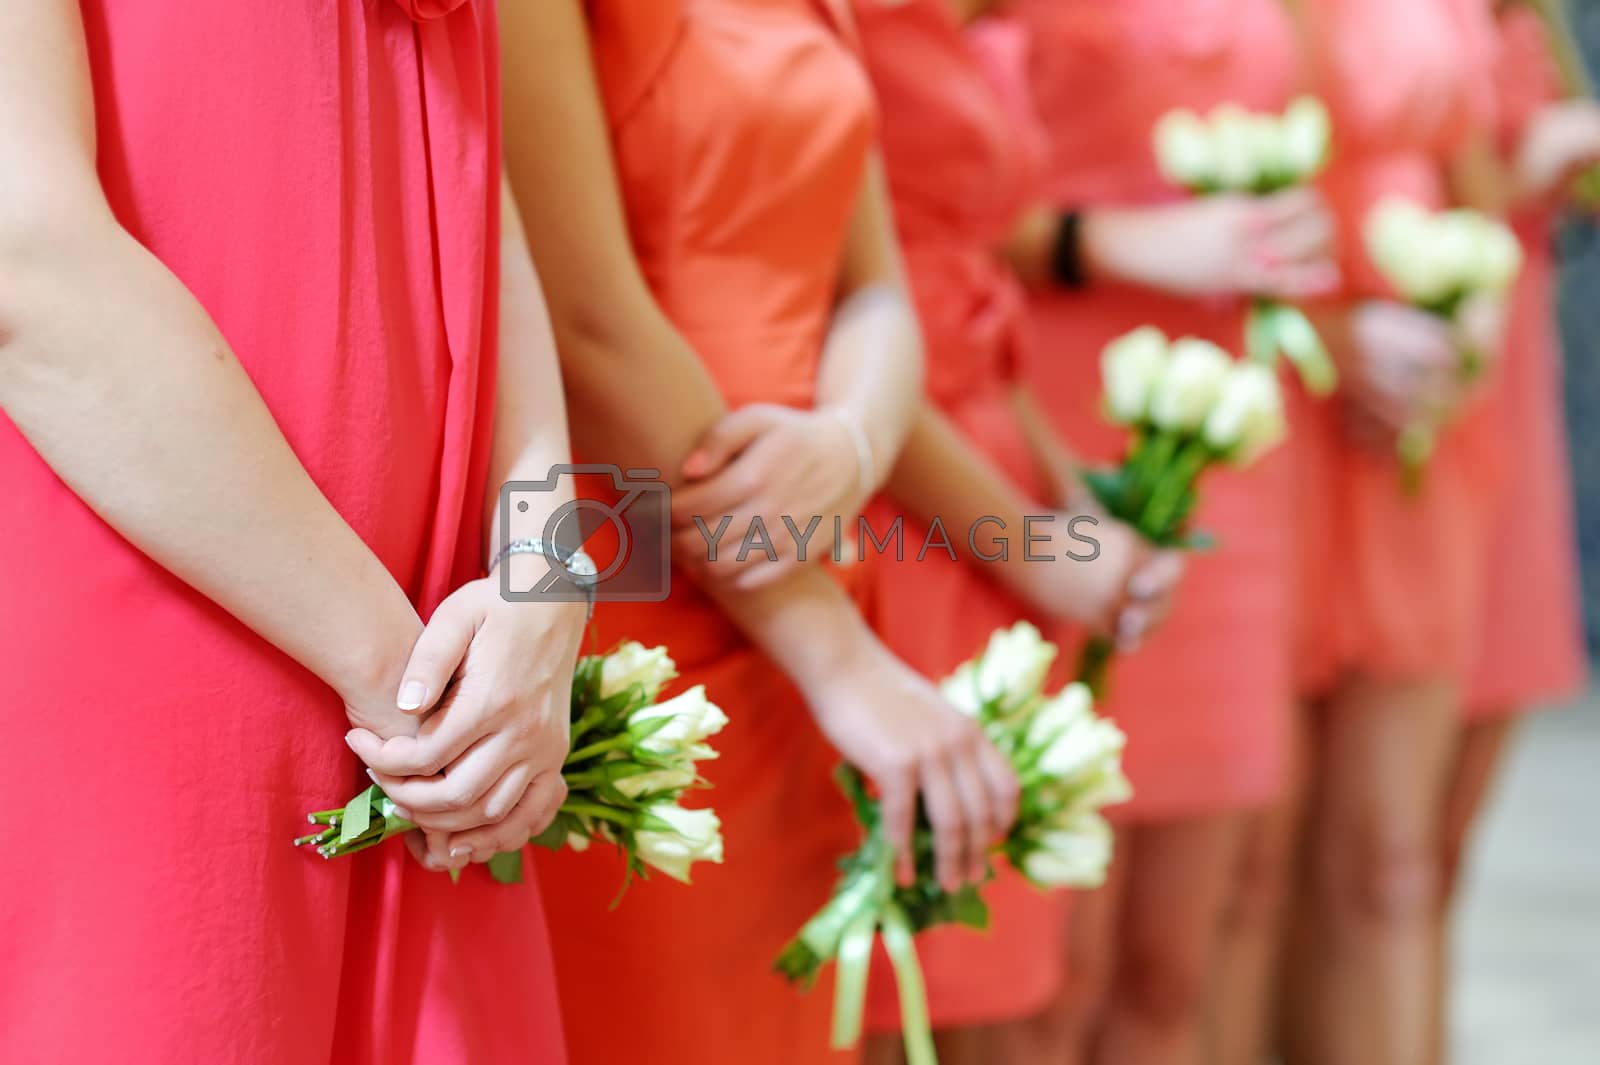 Royalty free image of Row of bridesmaids with bouquets by maximkabb